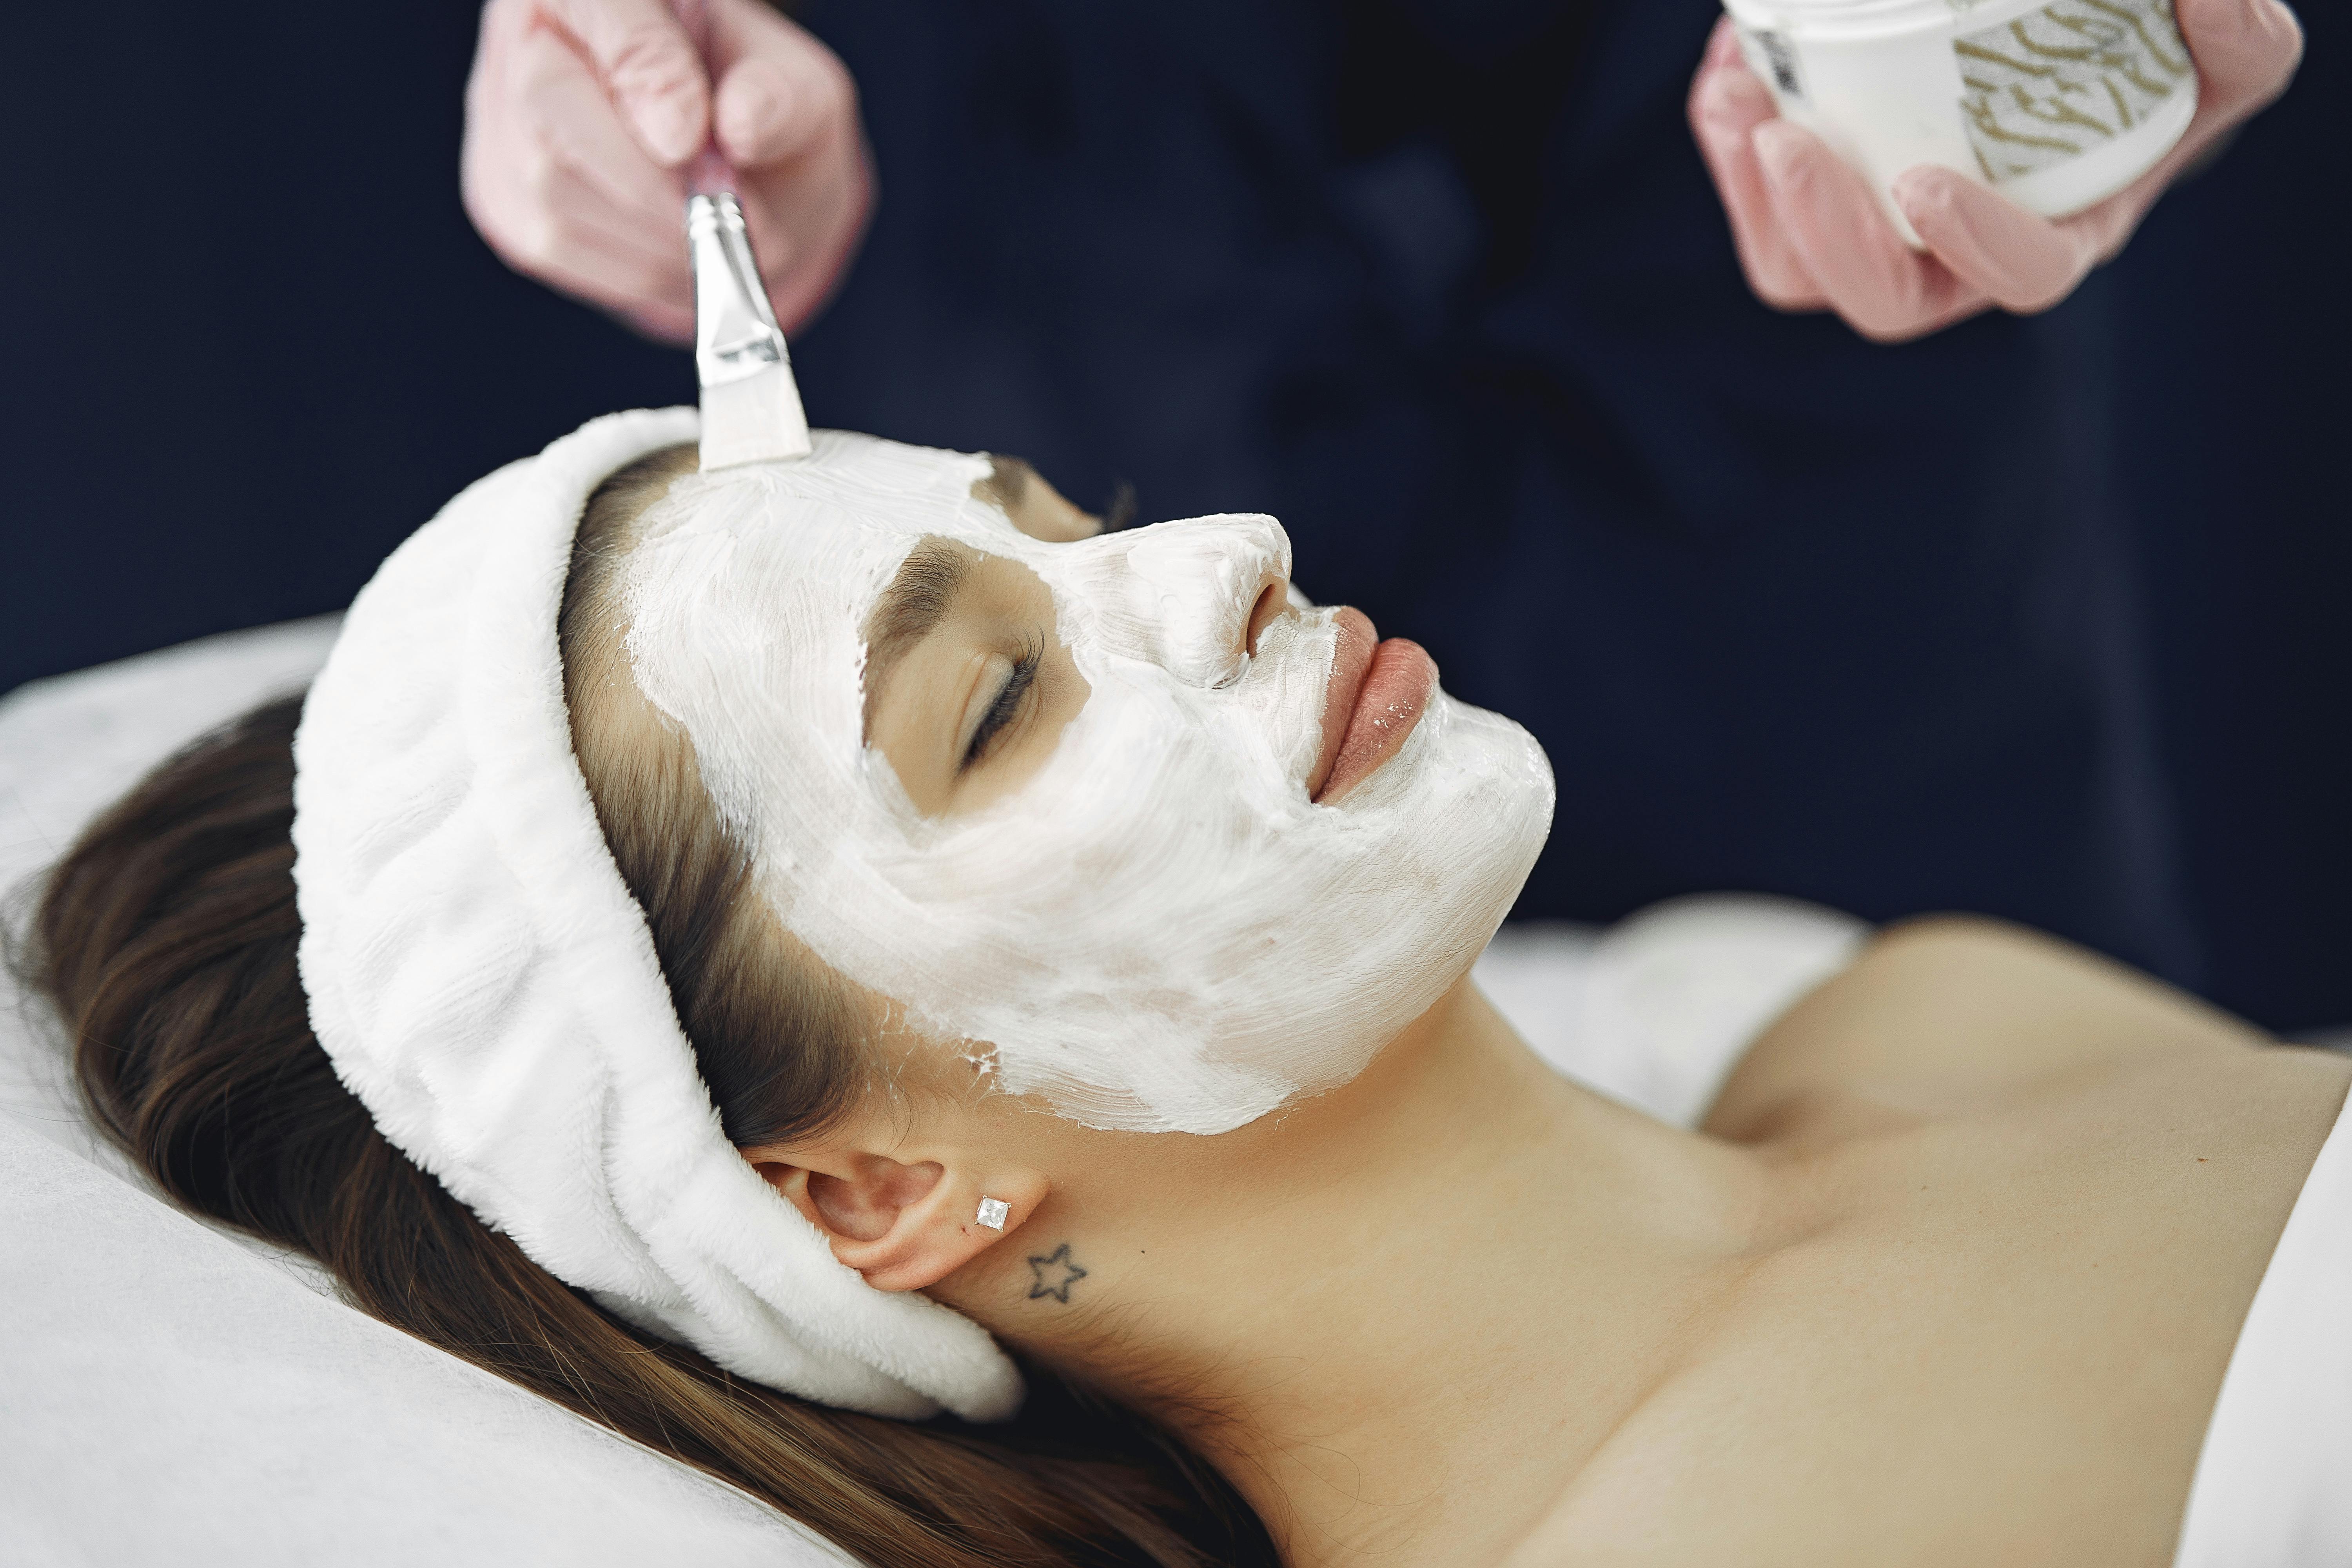 Discover Radiant Skin with Sculptra at Athena Dermatology Clinic, Dubai